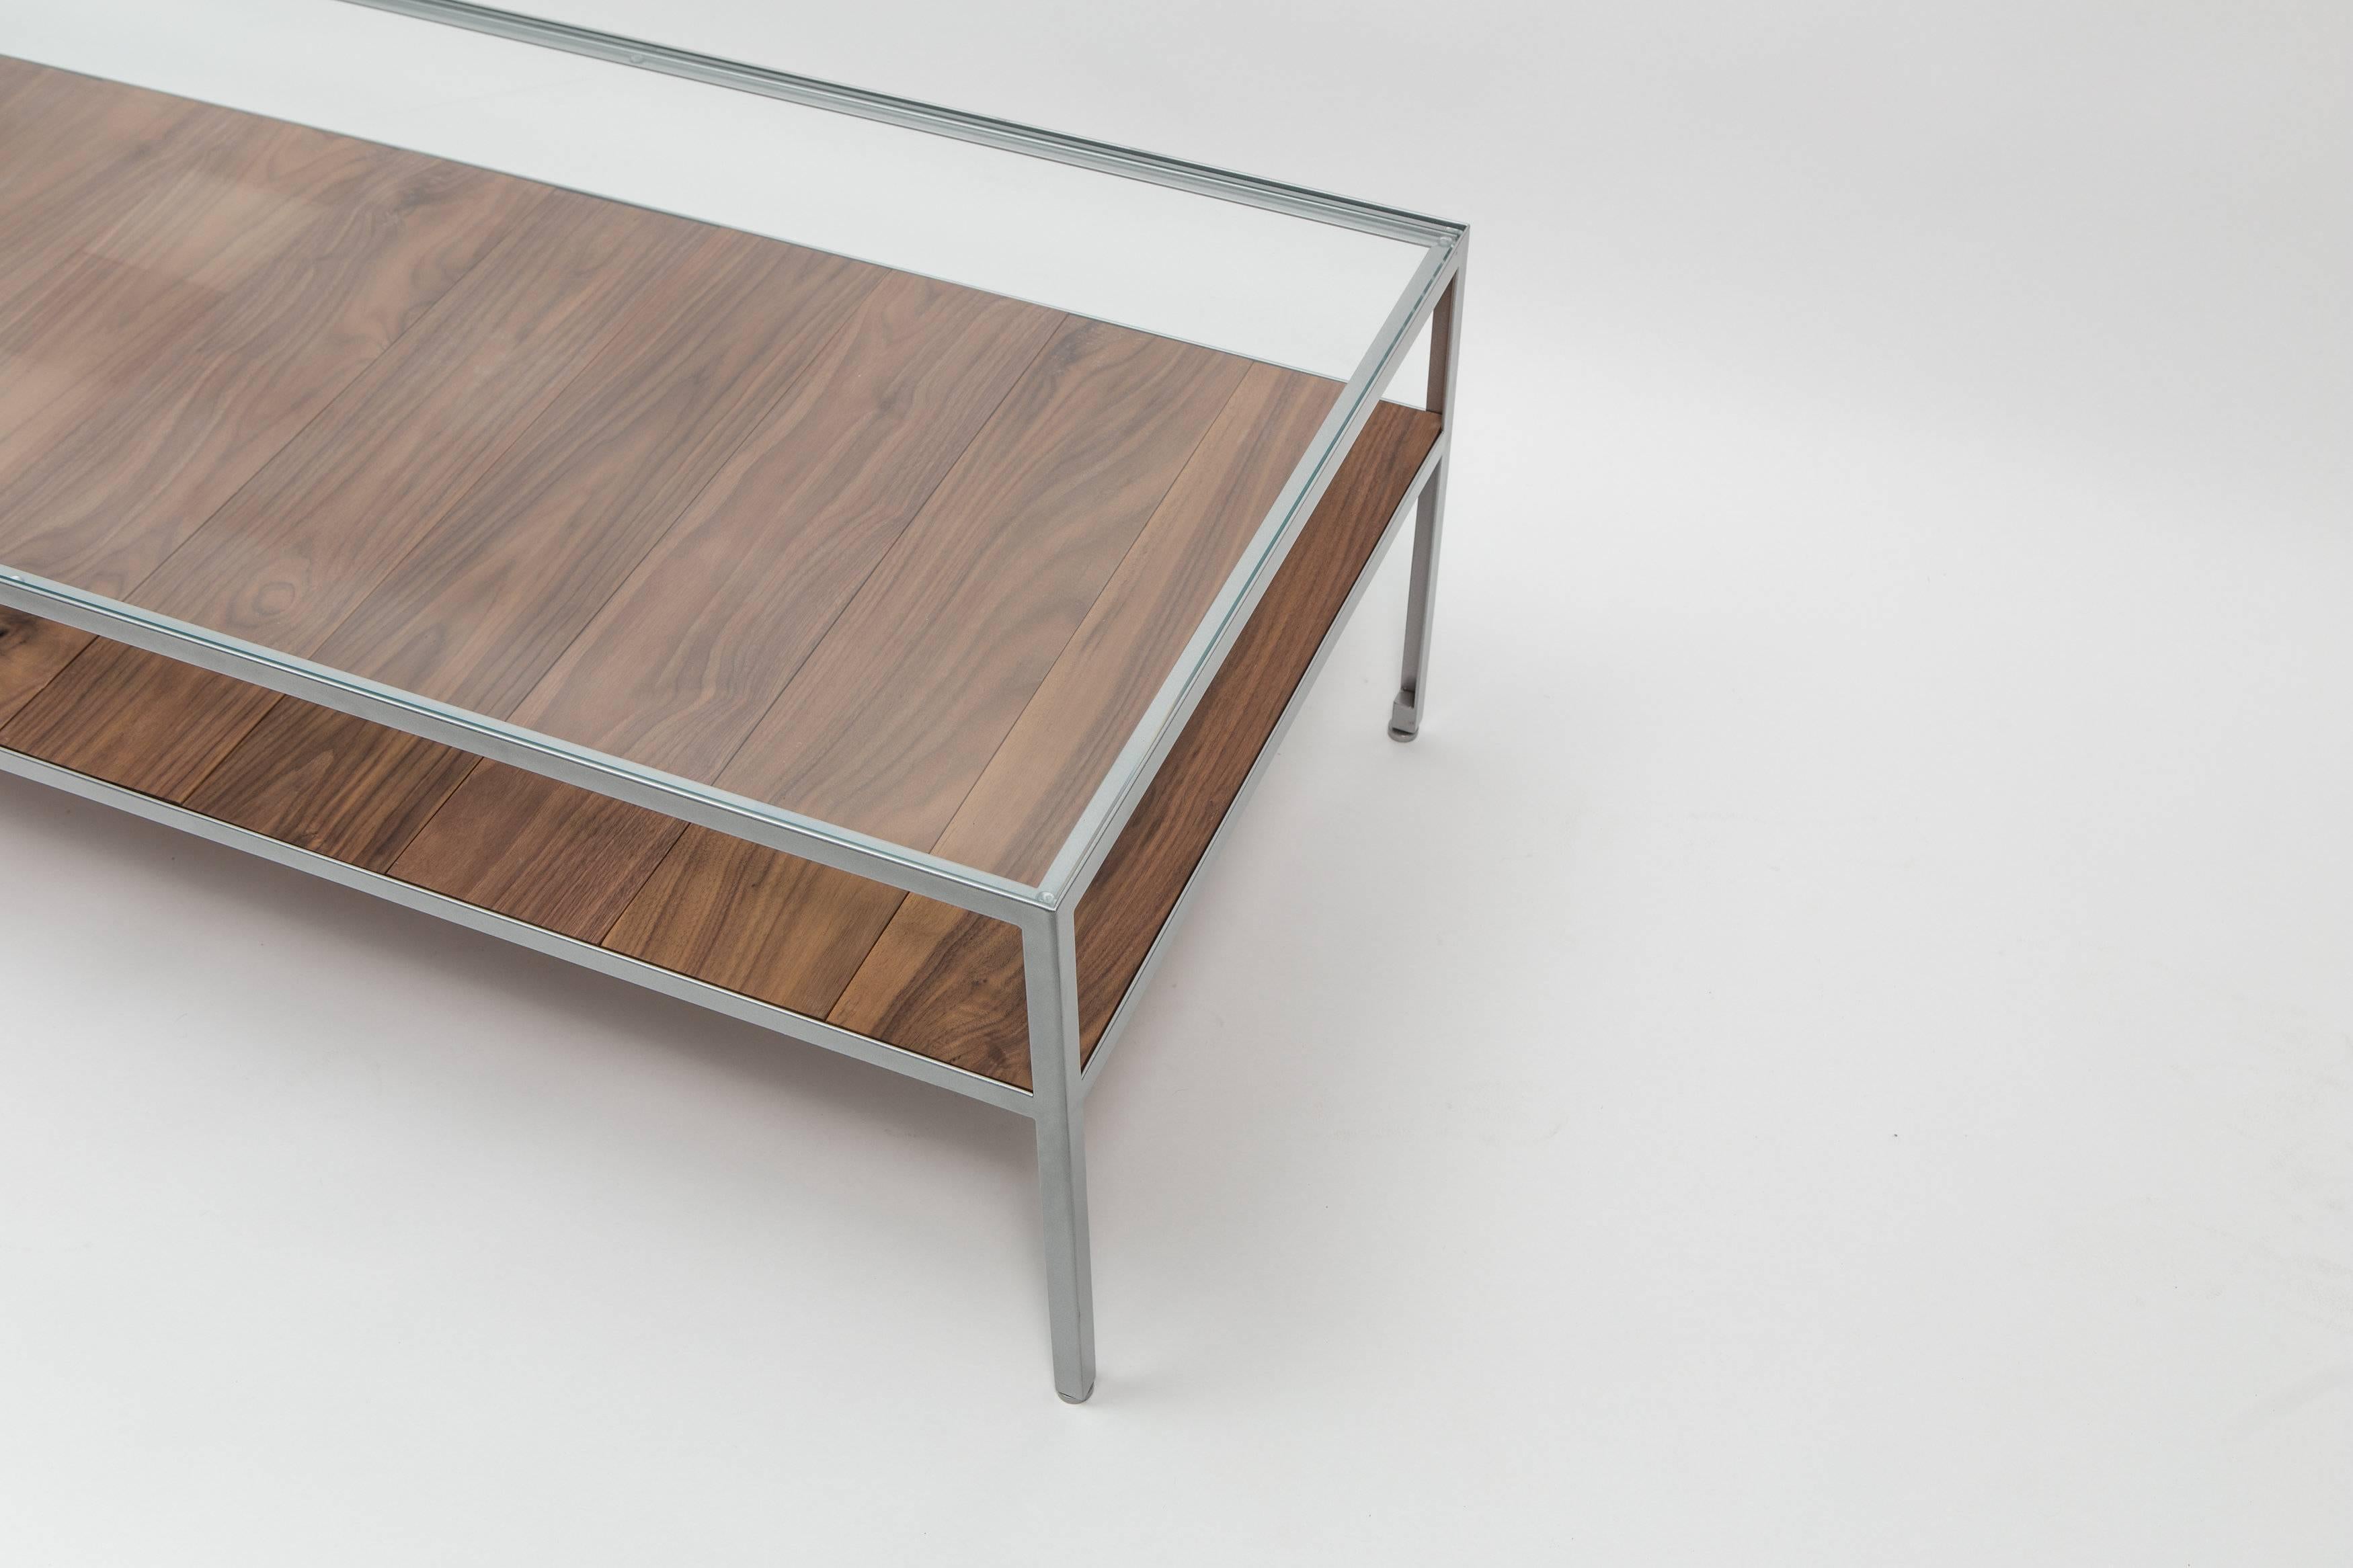 Angle Steel Coffee Table with Nickel Frame, Glass Top and Walnut Slats In Excellent Condition For Sale In New York, NY